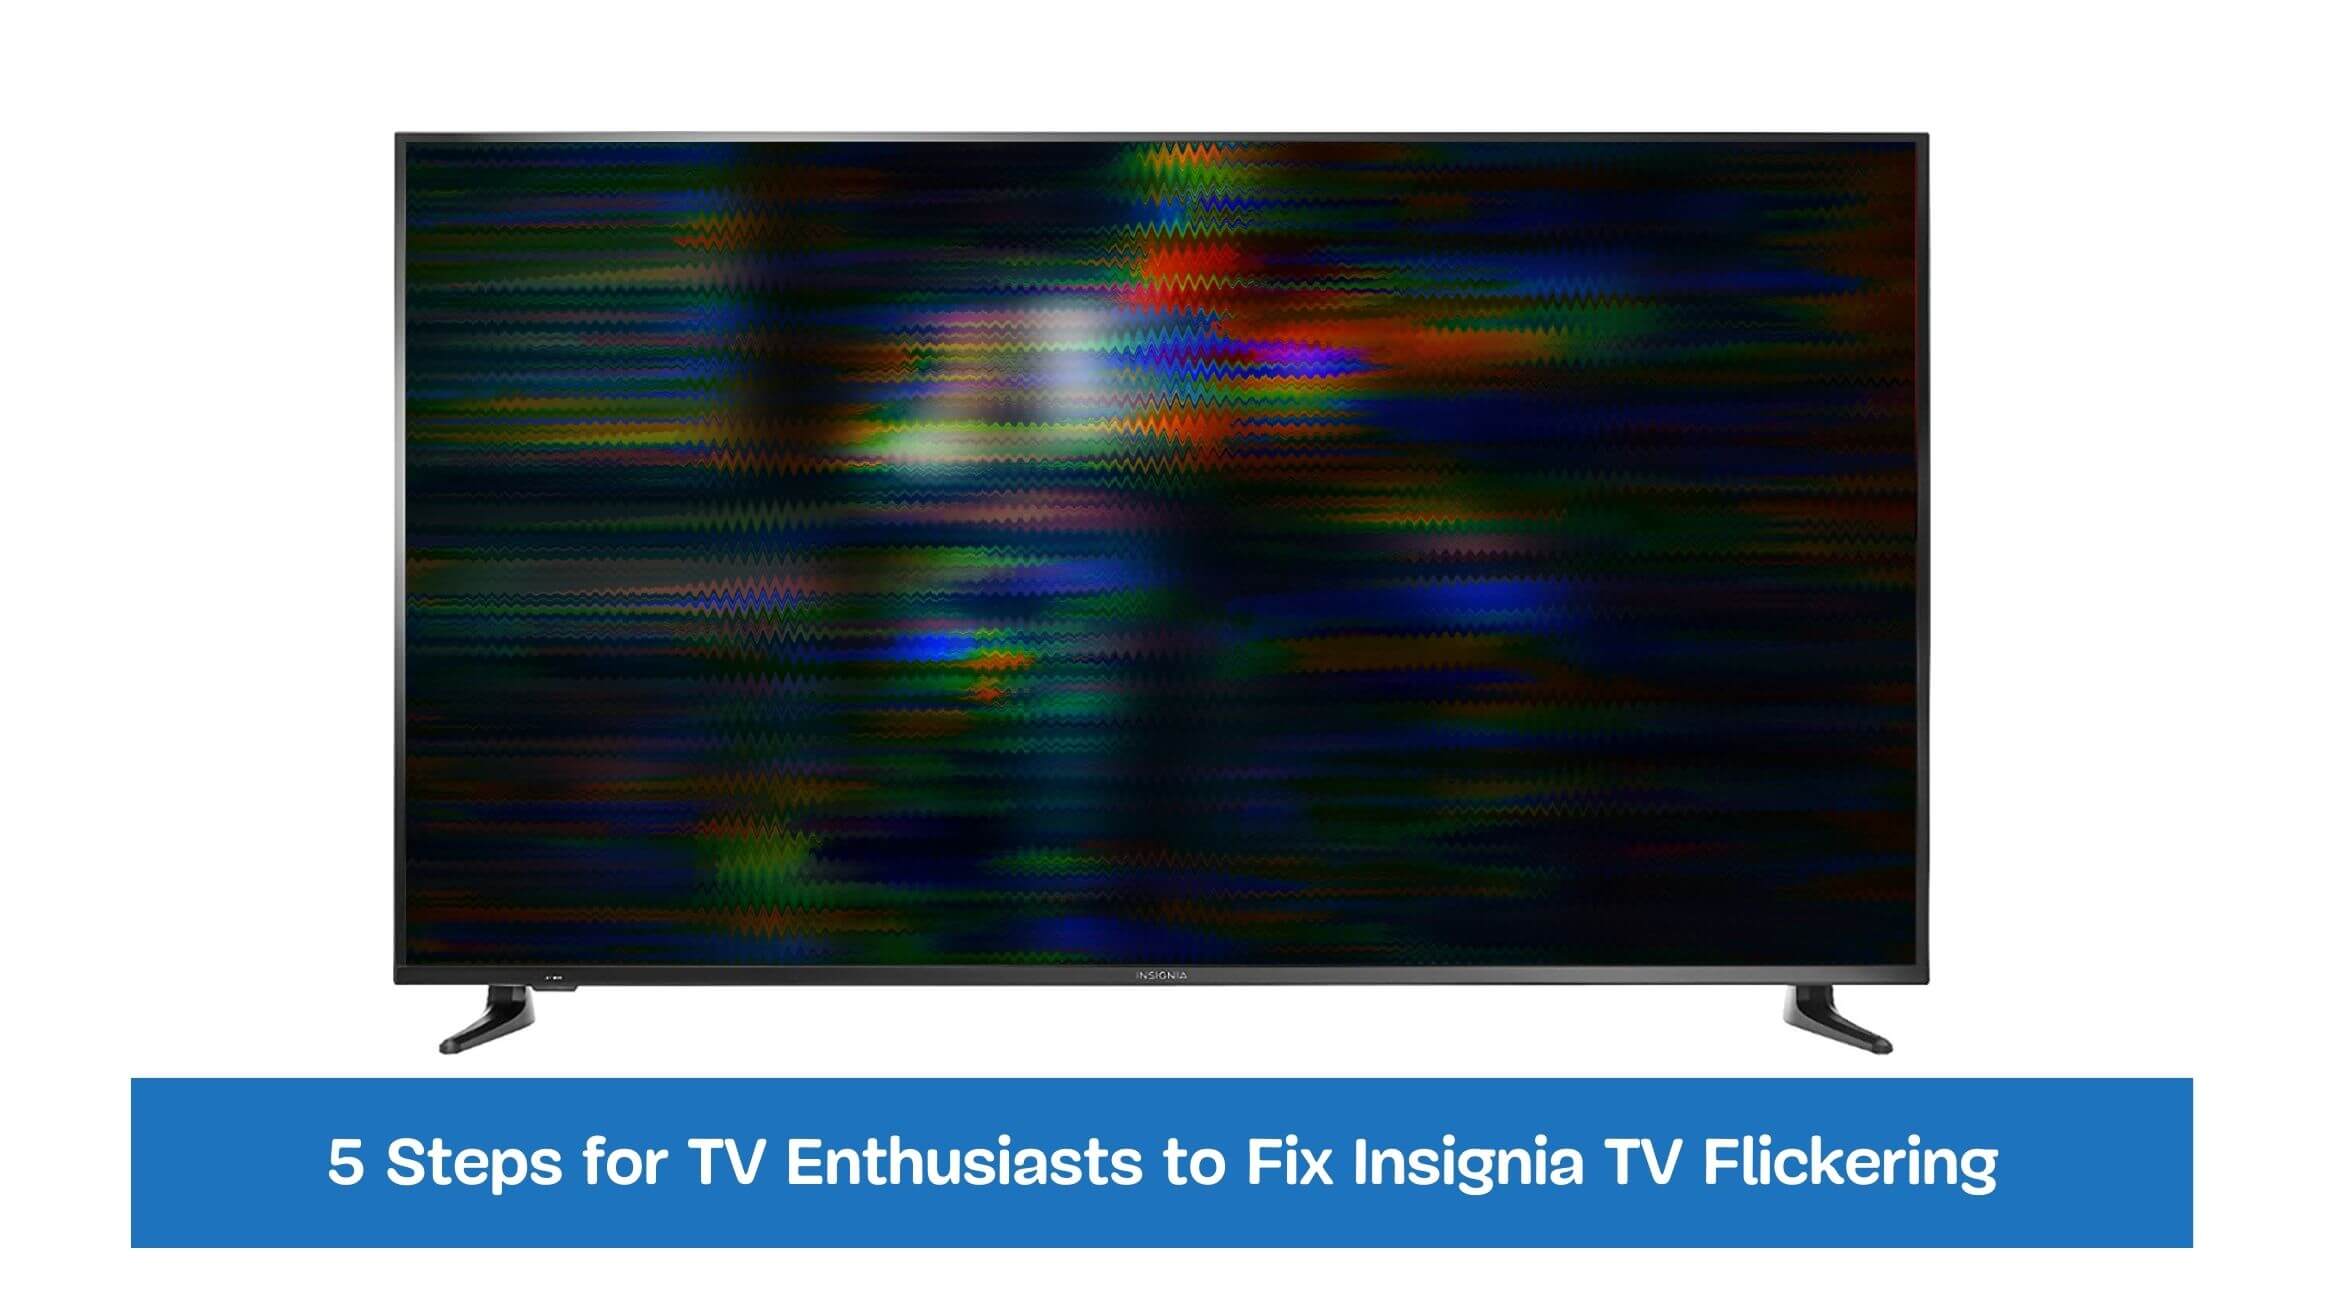 5 Steps for TV Enthusiasts to Fix Insignia TV Flickering